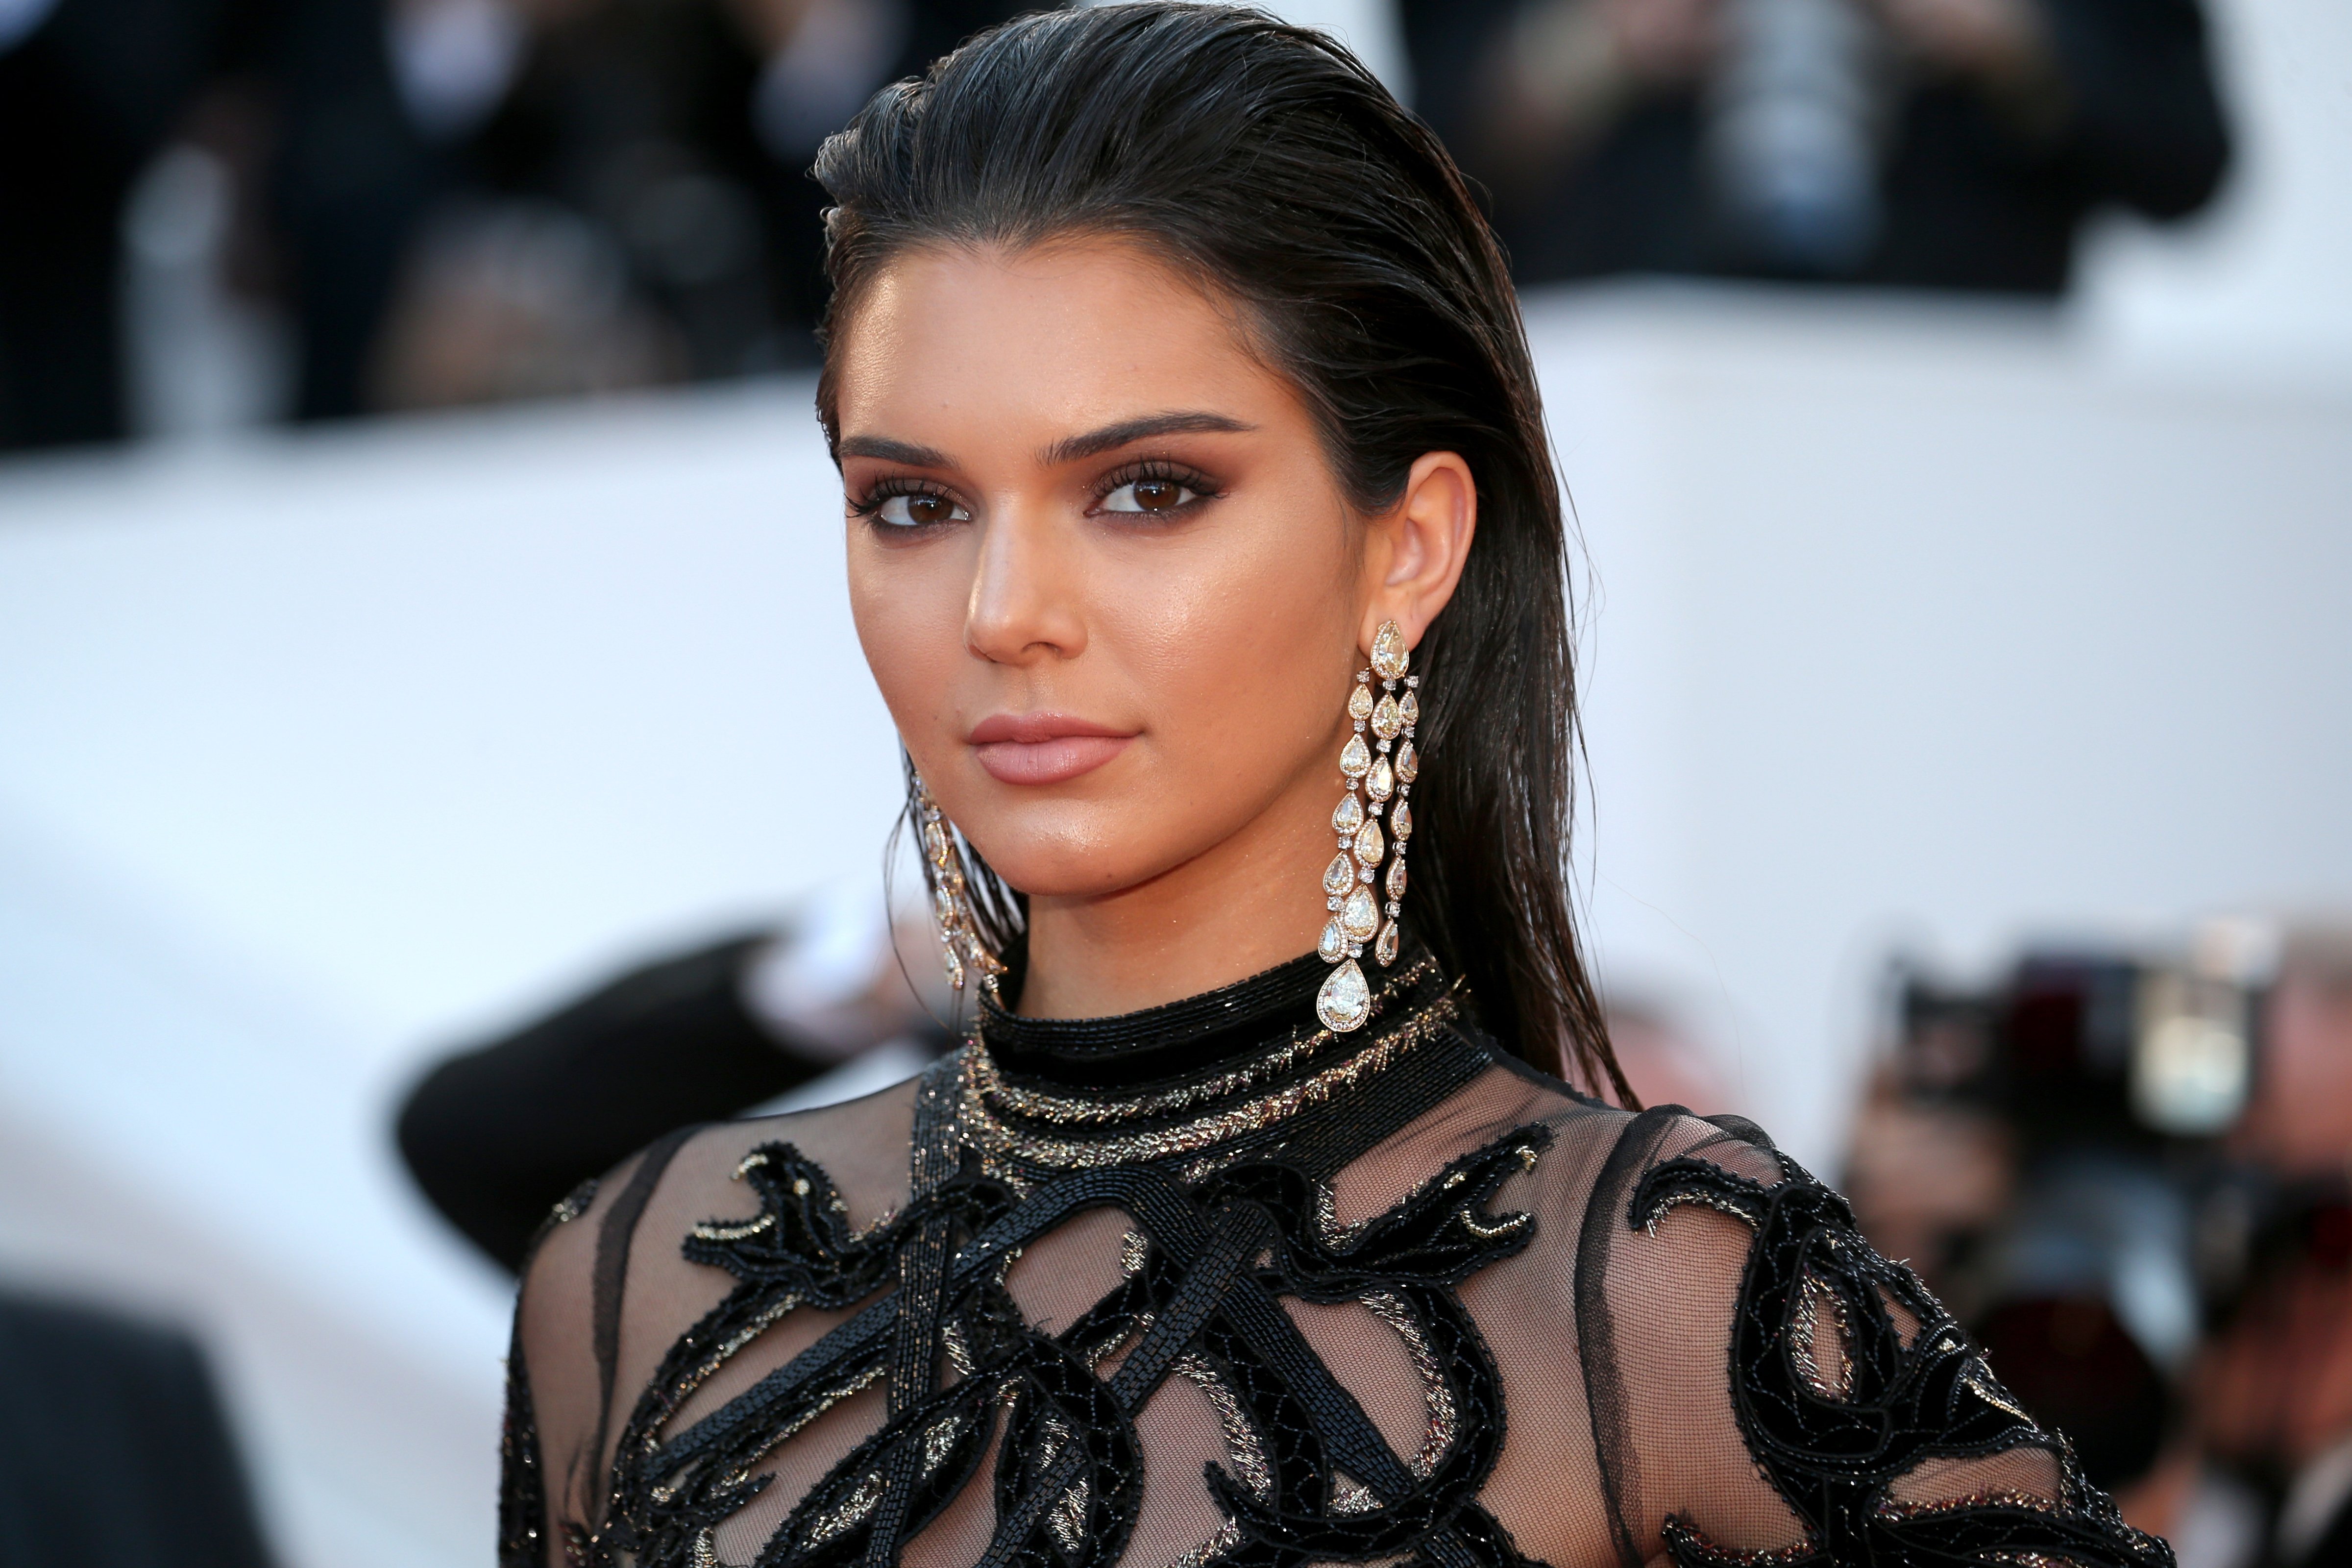 Kendall Jenner wearing Chopard jewelry during the "From The Land Of The Moon (Mal De Pierres)" premiere during the 69th annual Cannes Film Festival at the Palais des Festivals on May 15, 2016 in Cannes, France. (Gisela Schober—Getty Images)